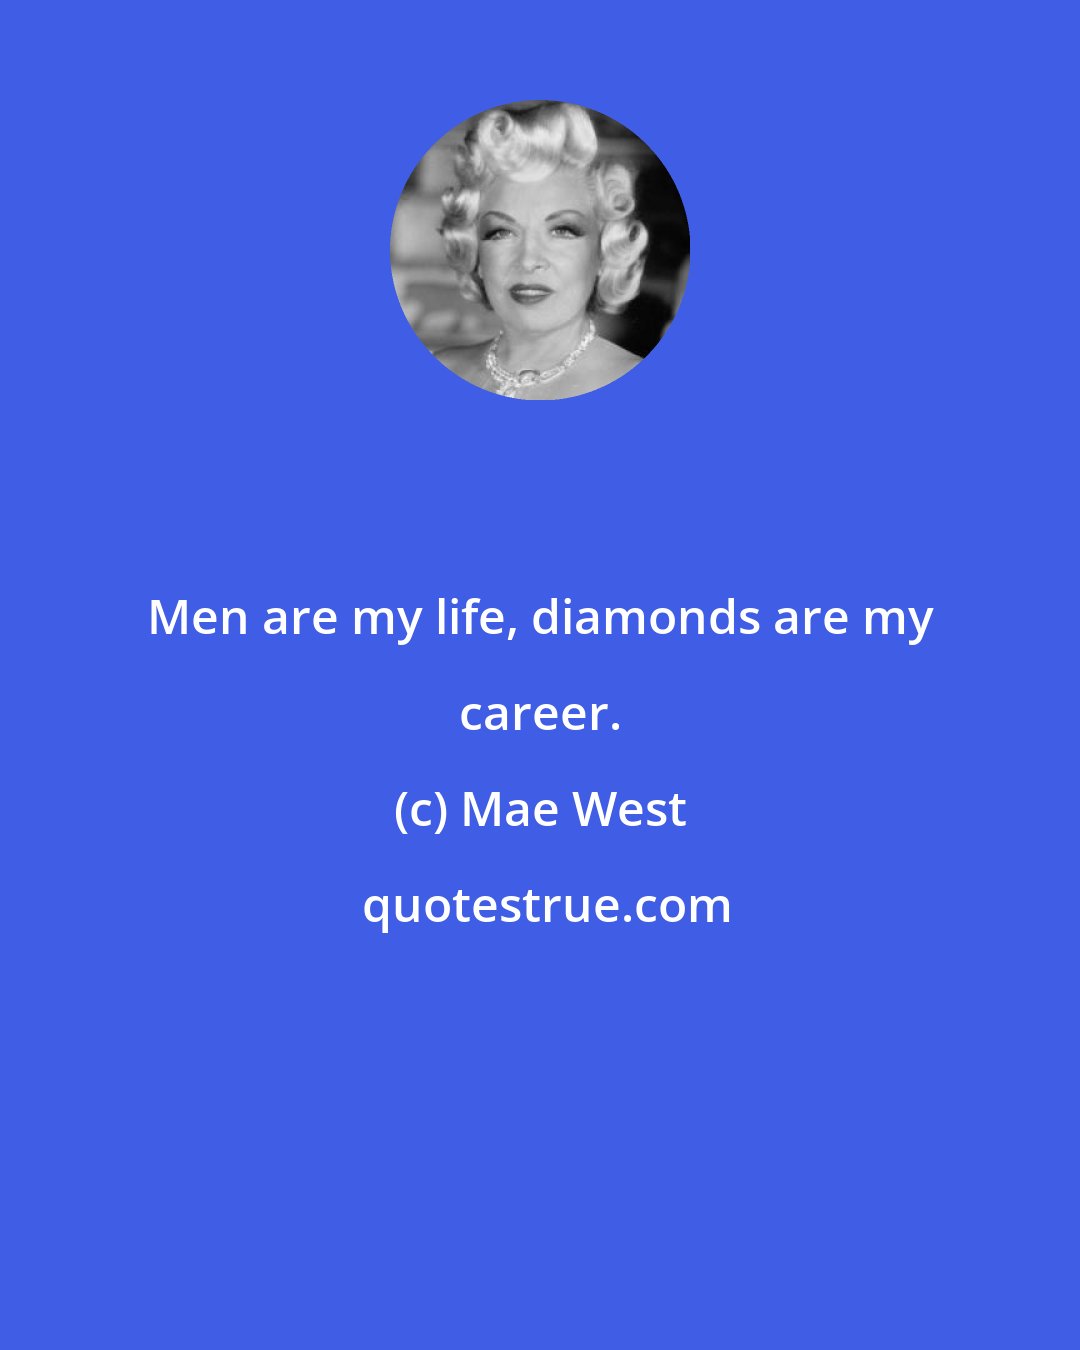 Mae West: Men are my life, diamonds are my career.